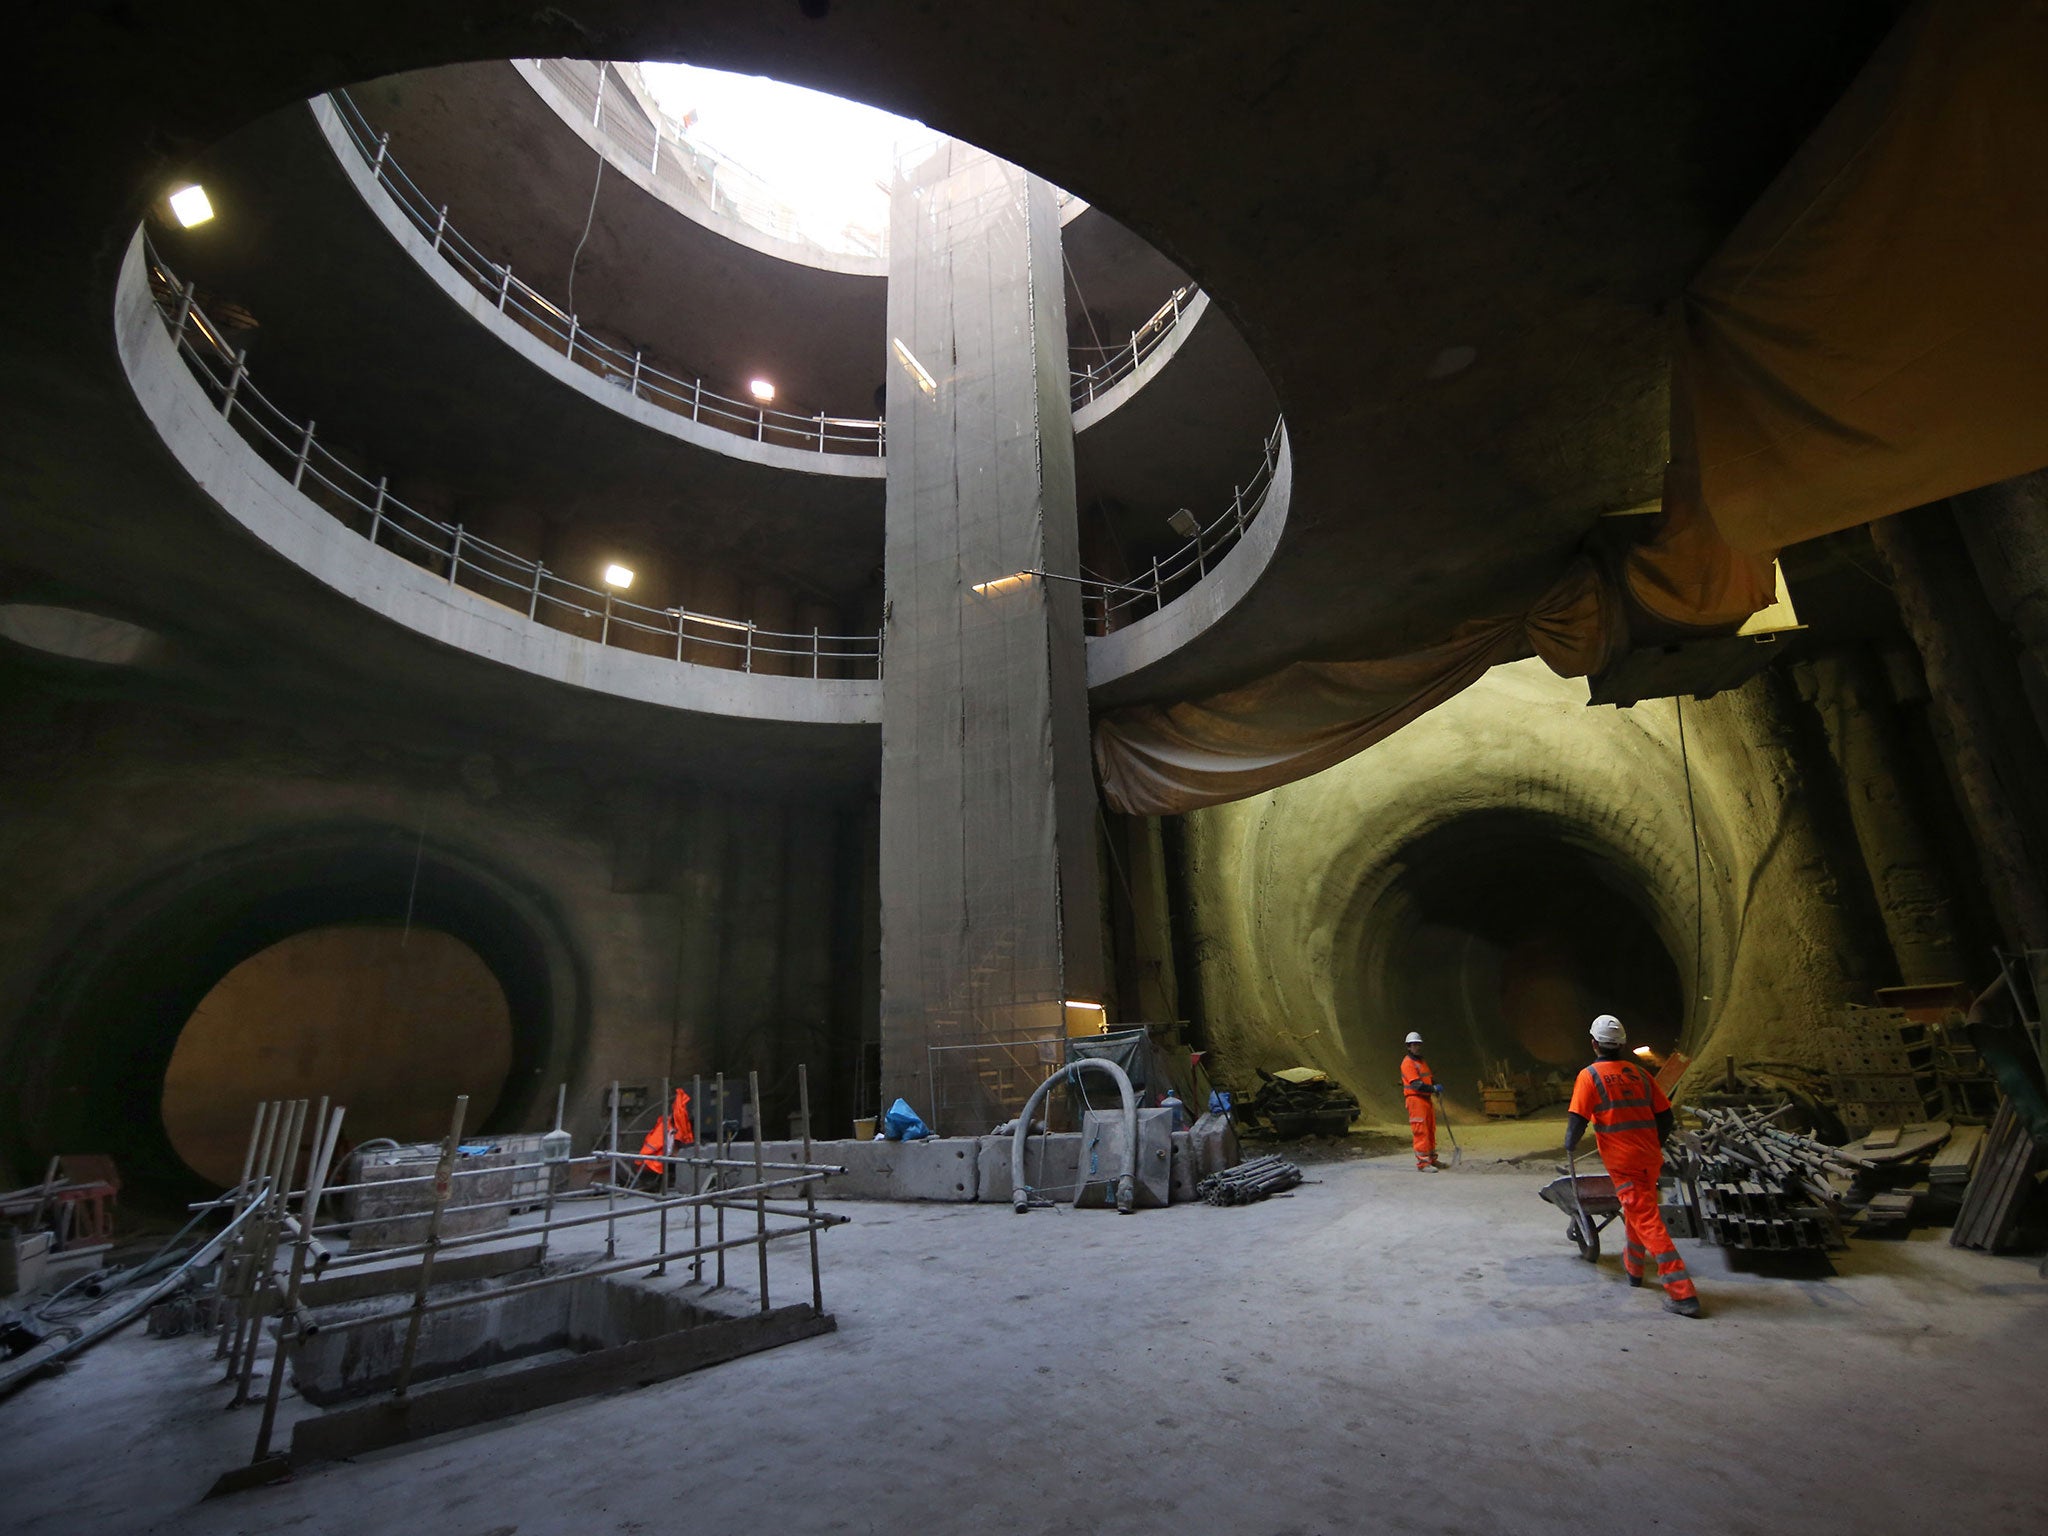 While projects in London, such as Crossrail, pictured, have been approved, projects in the North, such as the electrification of the Manchester-Leeds line, have been shelved